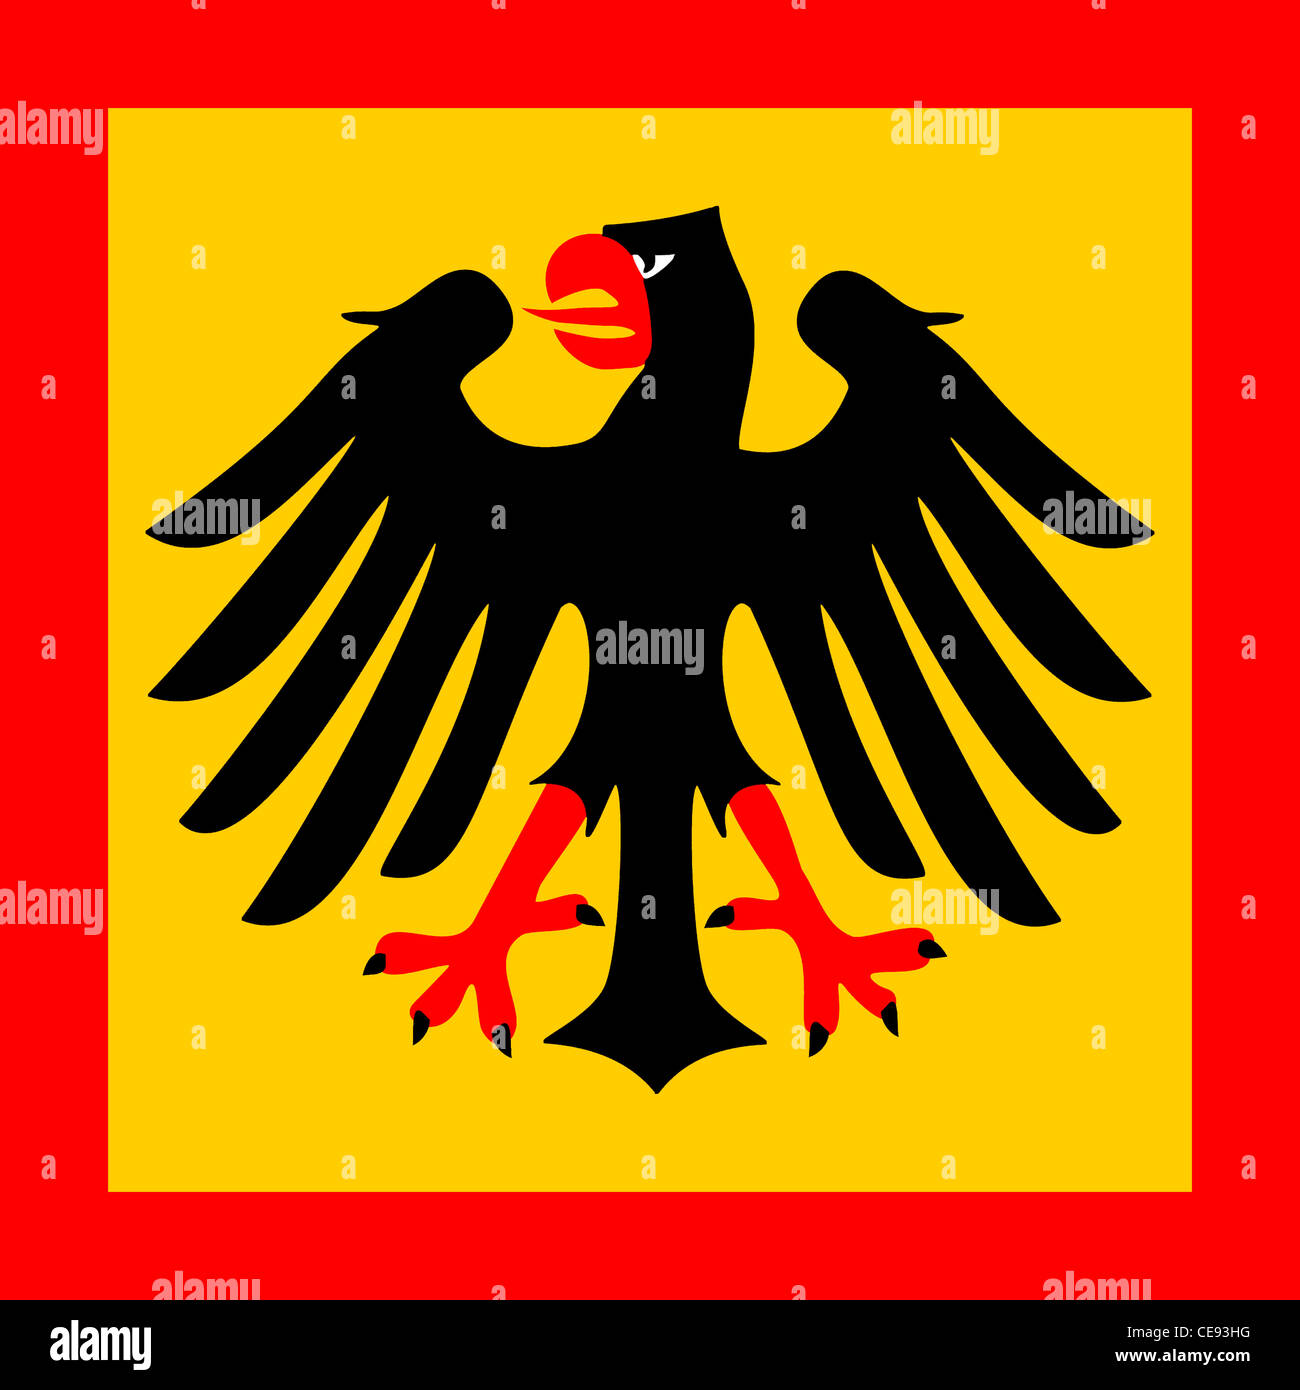 Standard of the President of the Federal Republic of Germany with the Federal eagle. Stock Photo